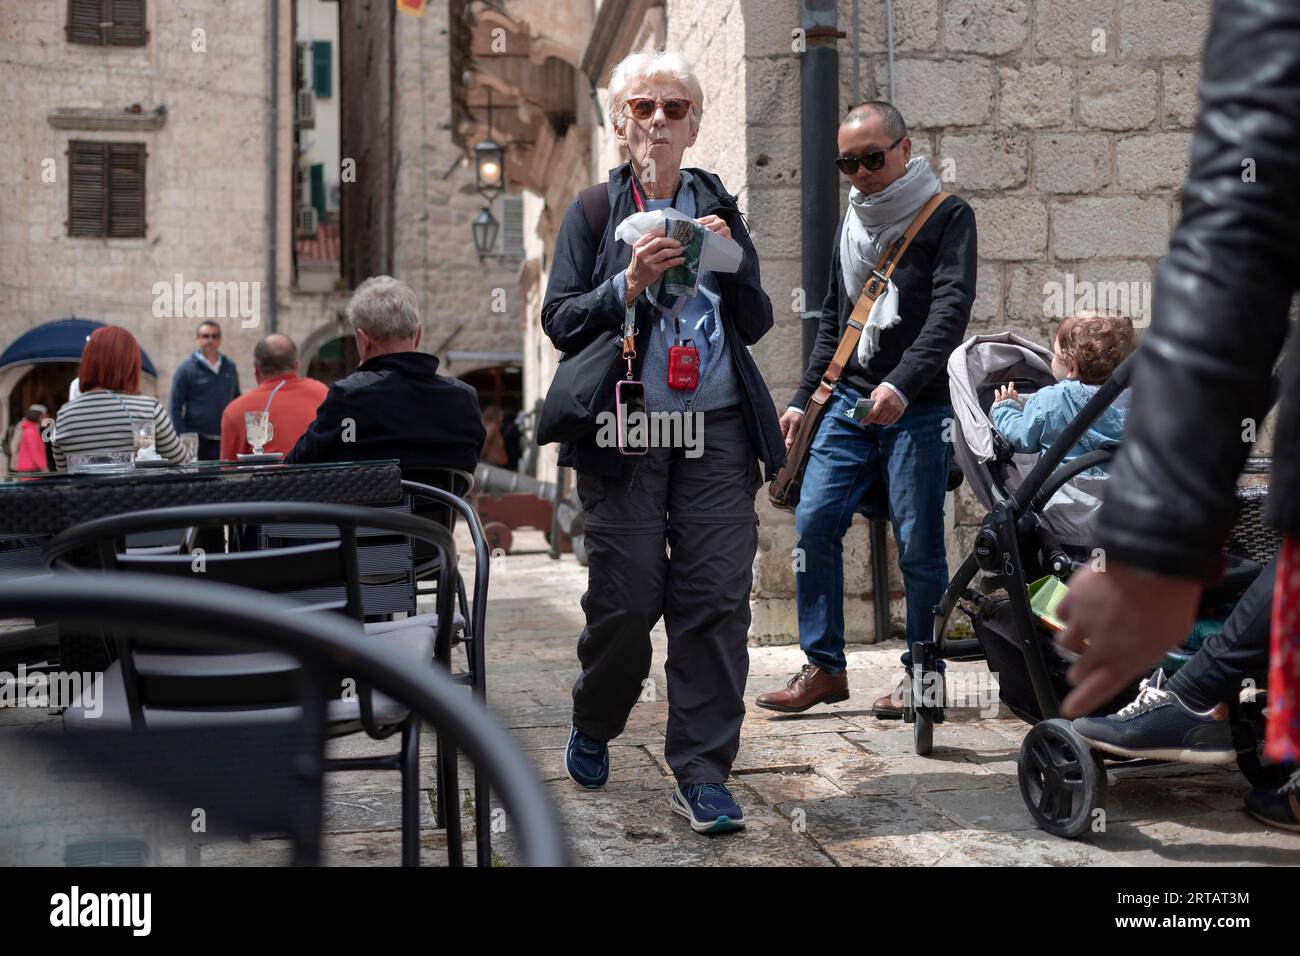 Kotor, Montenegro, Apr 17, 2023: Elderly lady snacking and walking down the narrow cobblestone street of Old Town Stock Photo